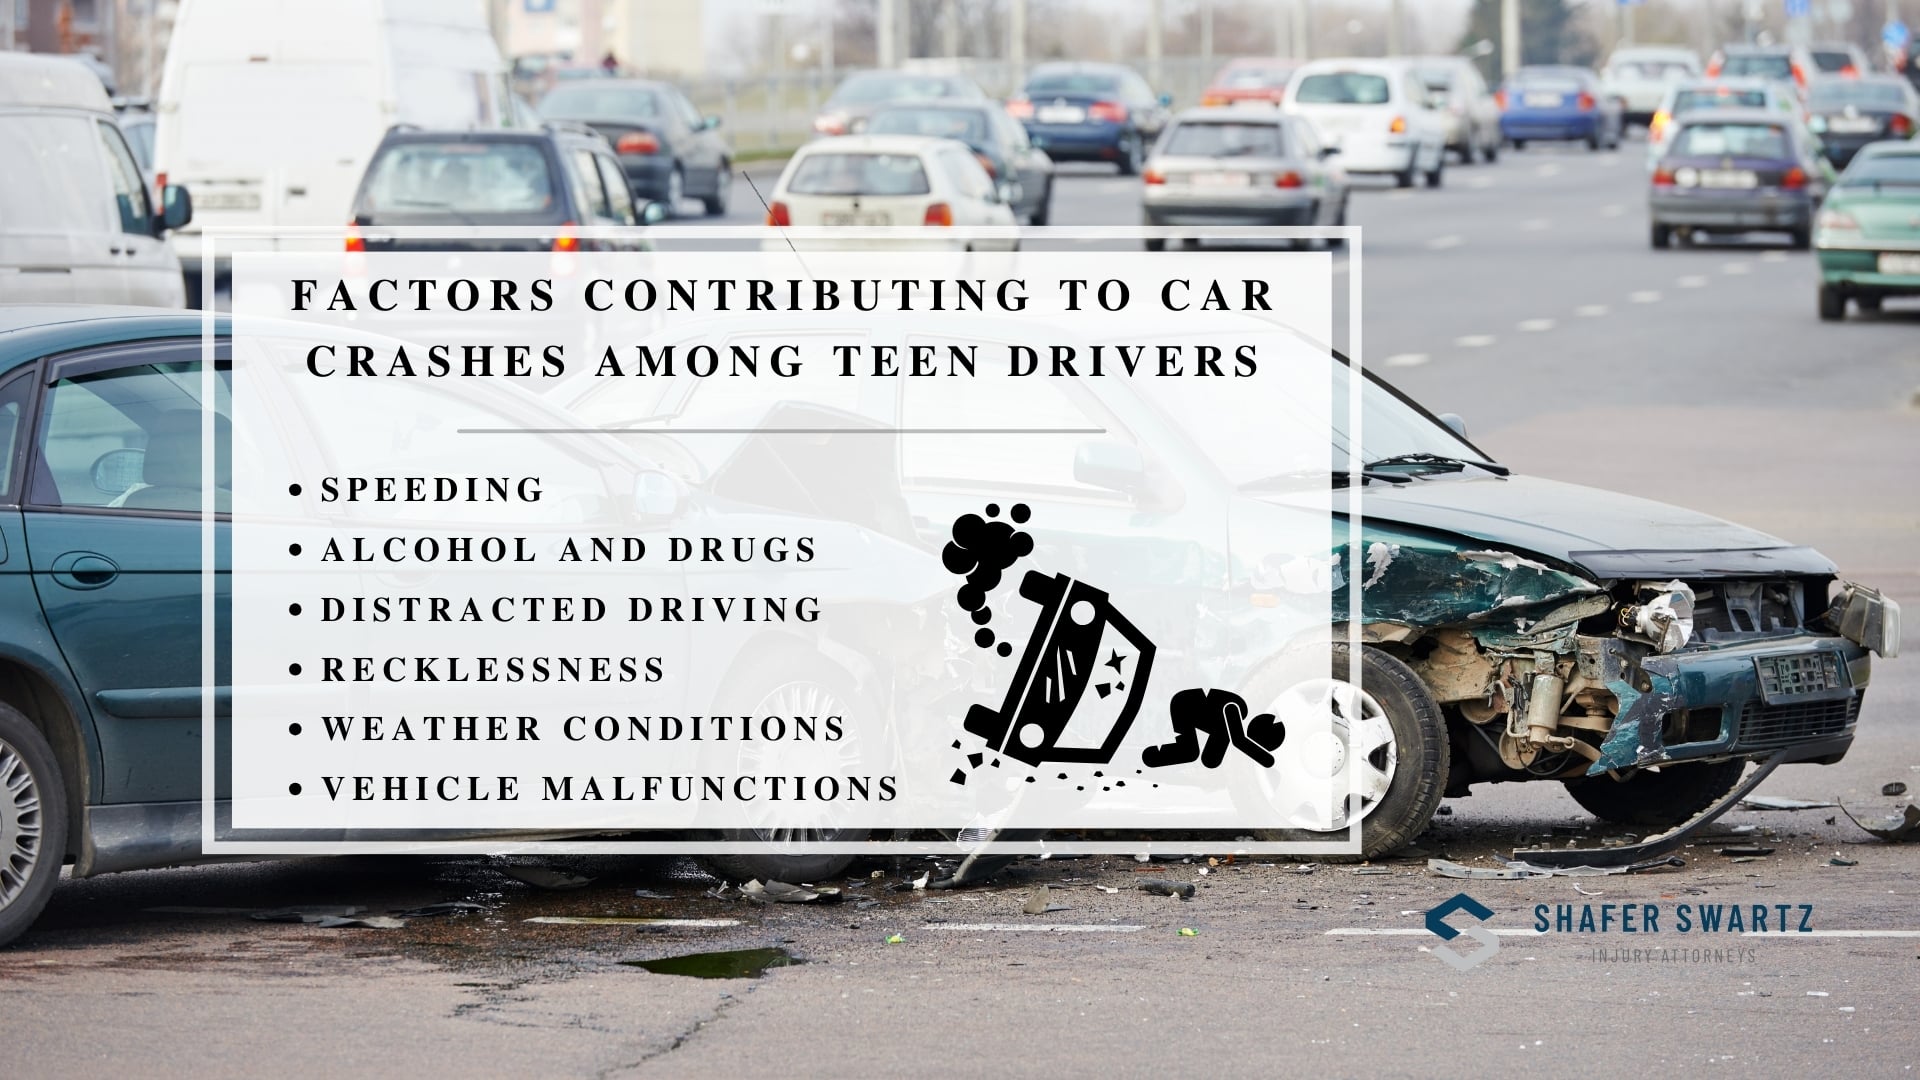 Infographic image of factors contributing to car crashes among teen drivers